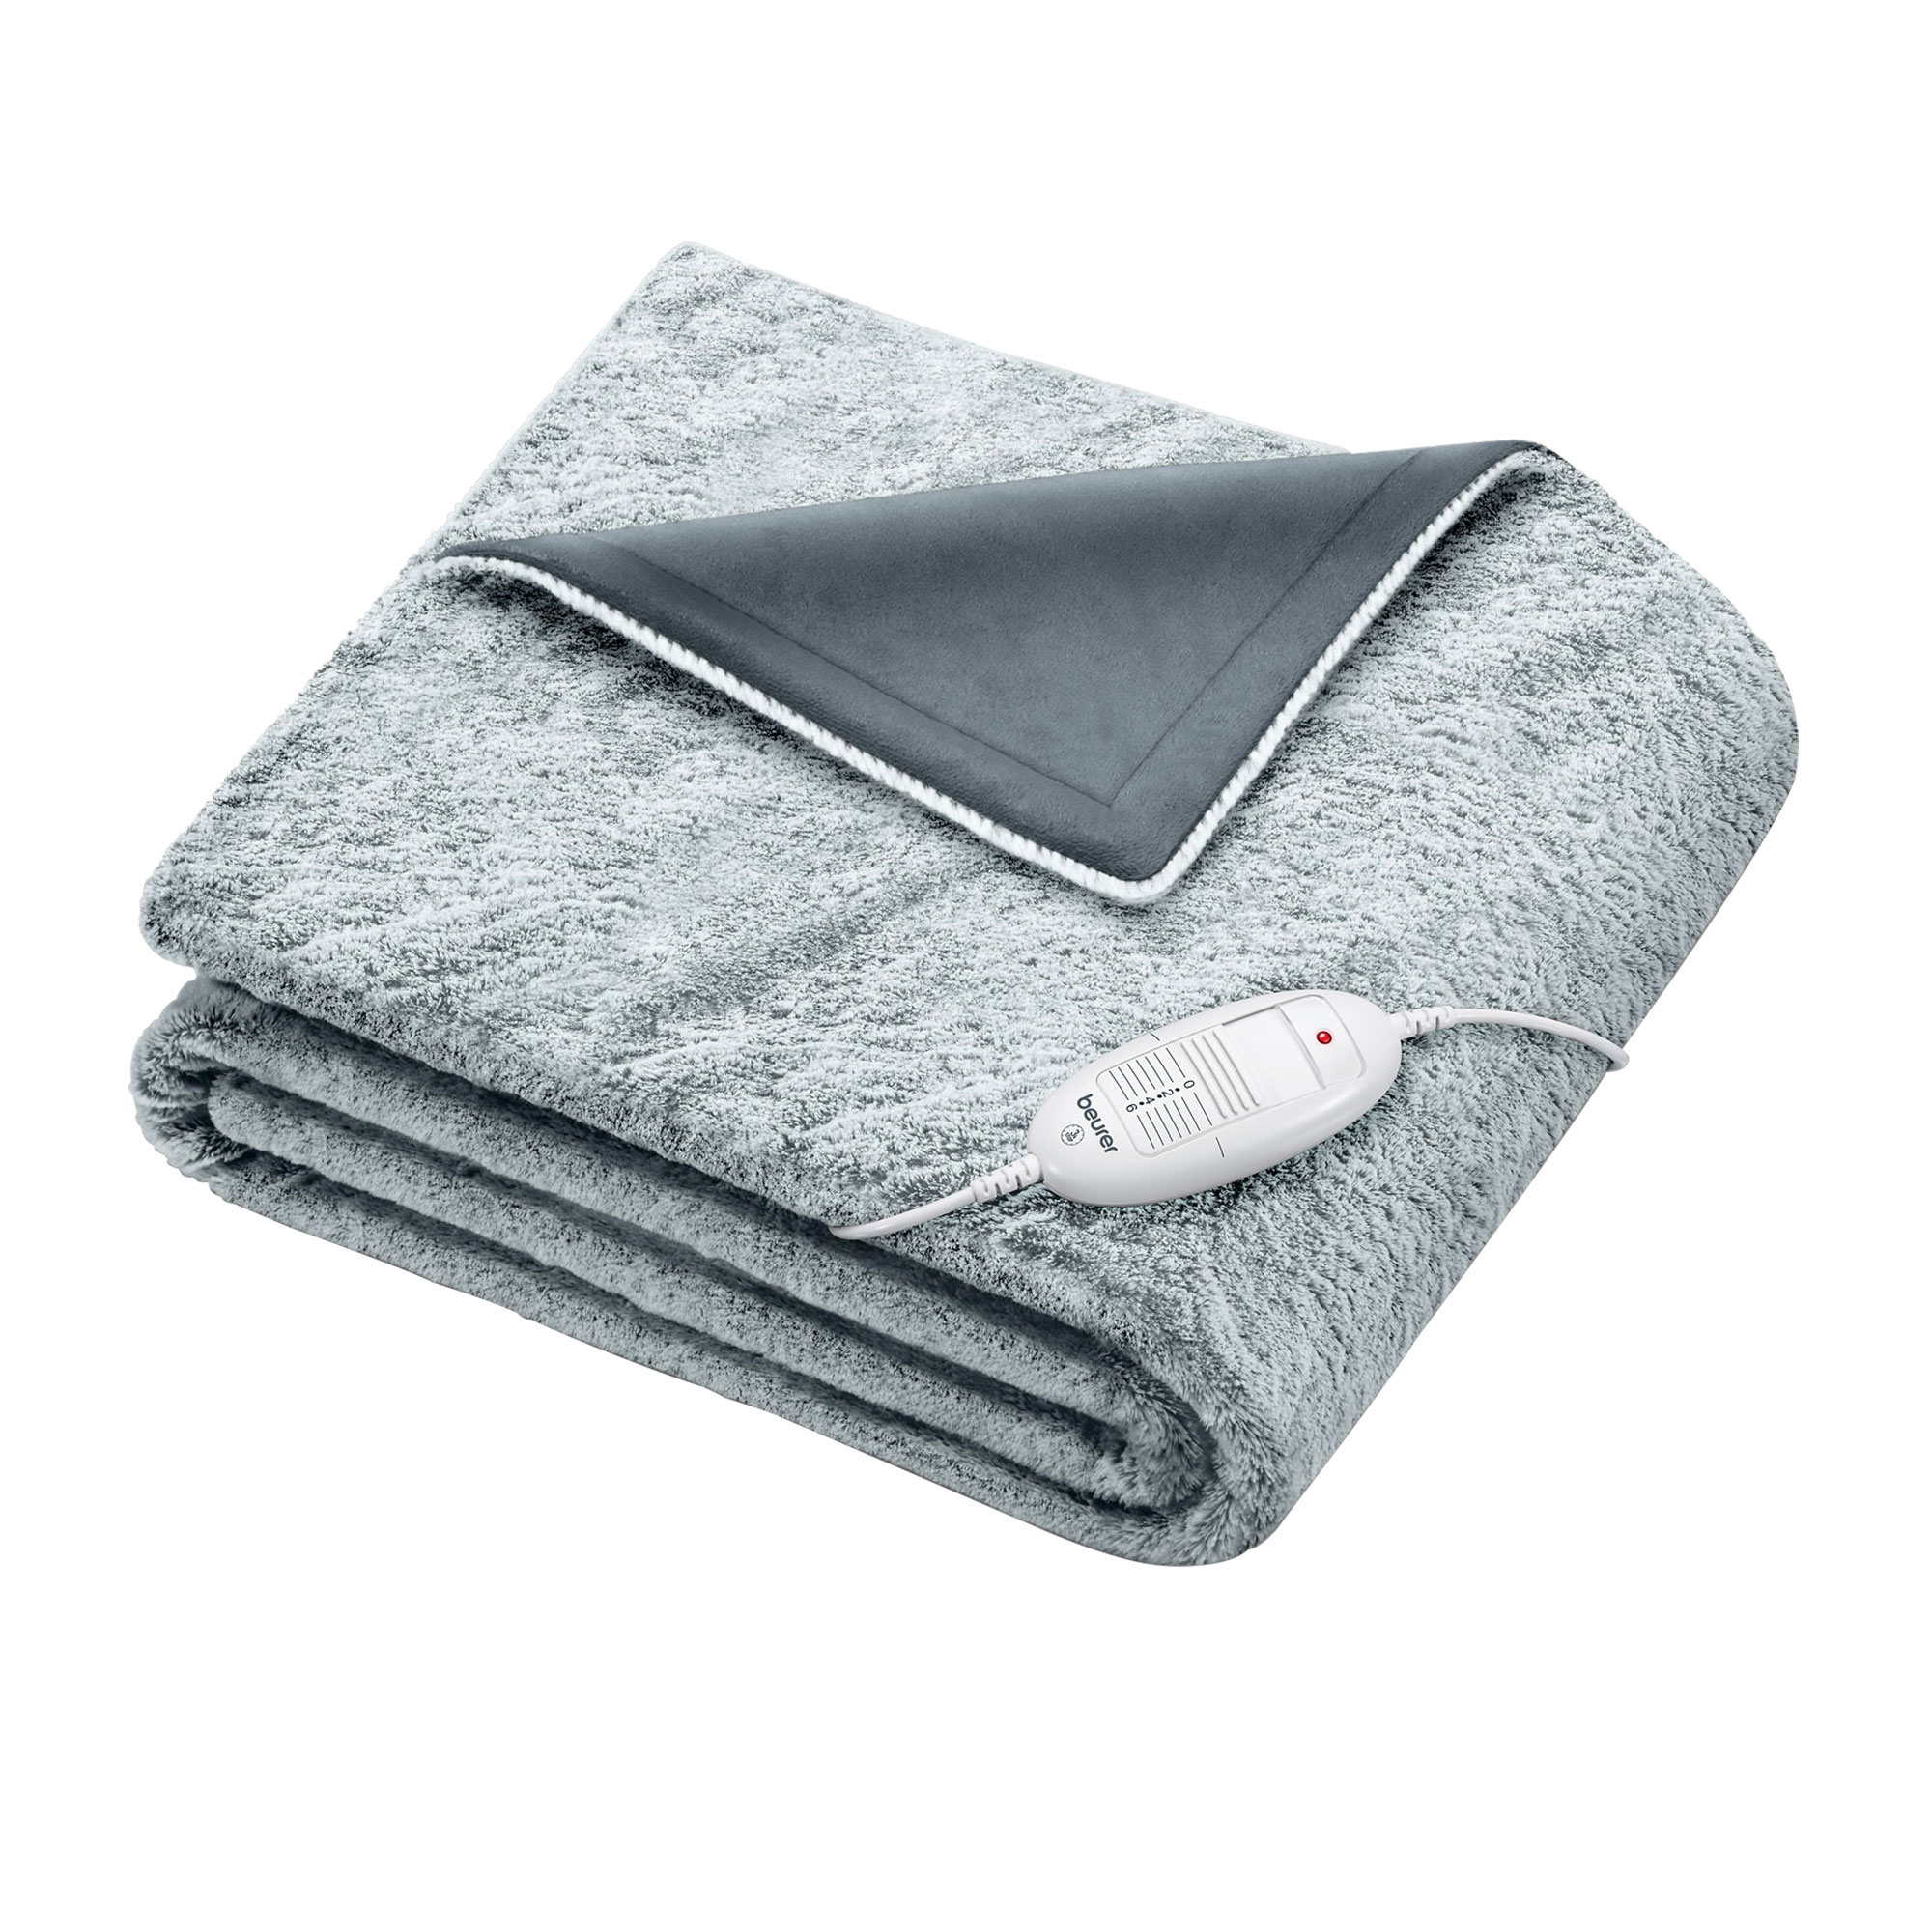 Beurer Super Cosy Heated Throw Blanket Charcoal Grey Image 1